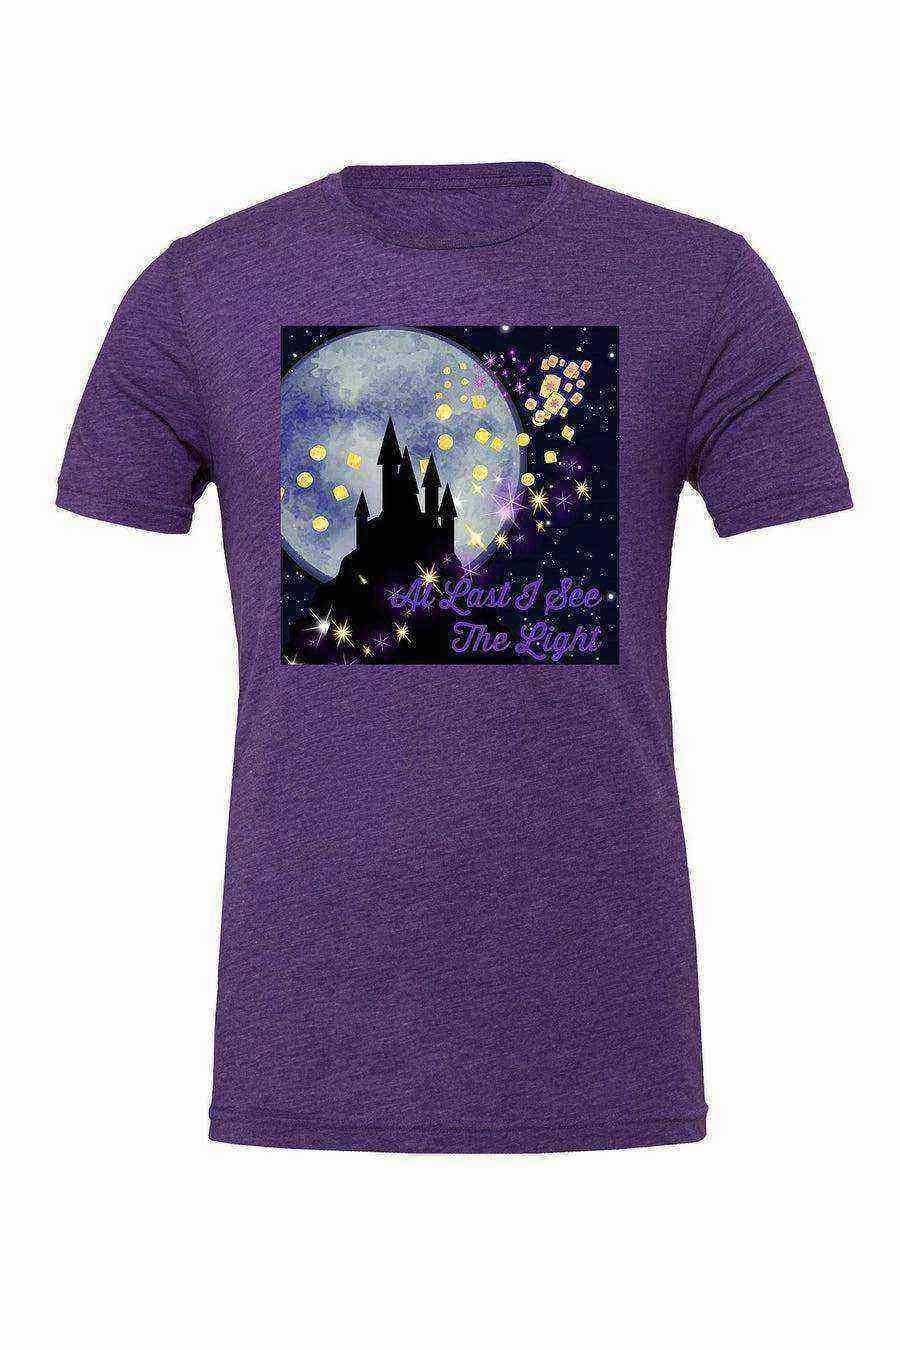 Womens | Tangled At Last I See The Light Shirt - Dylan's Tees